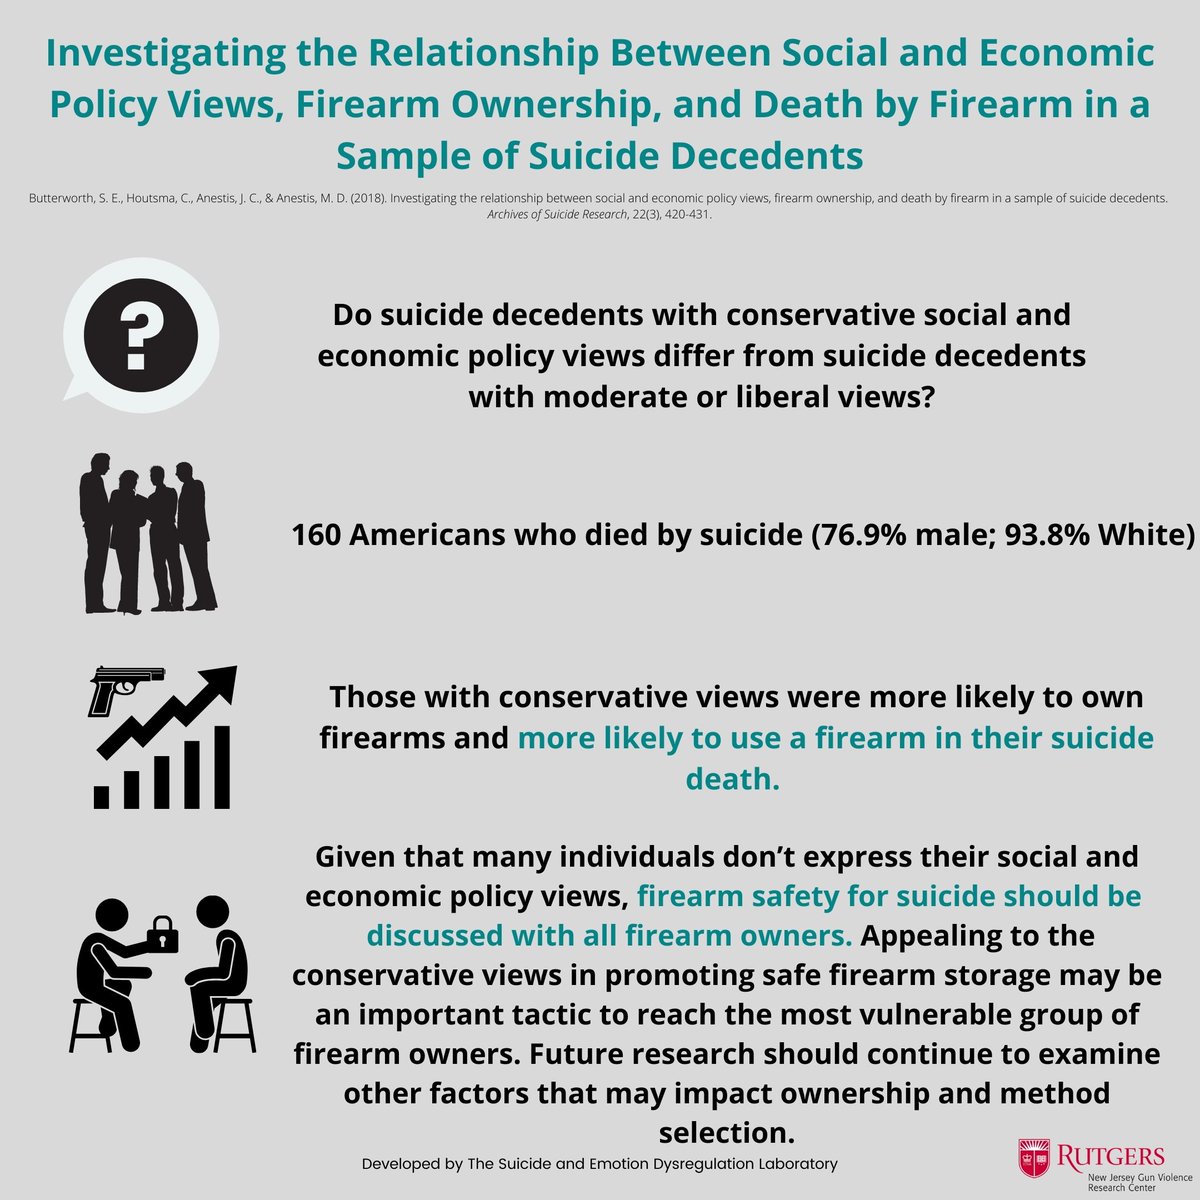 Suicide decedents with conservative views are more likely to use a firearm in their suicide death. Determining ways to increase the effectiveness of means safety efforts with this vulnerable group of firearm owners is important for prevention efforts.  #sciencesimplified